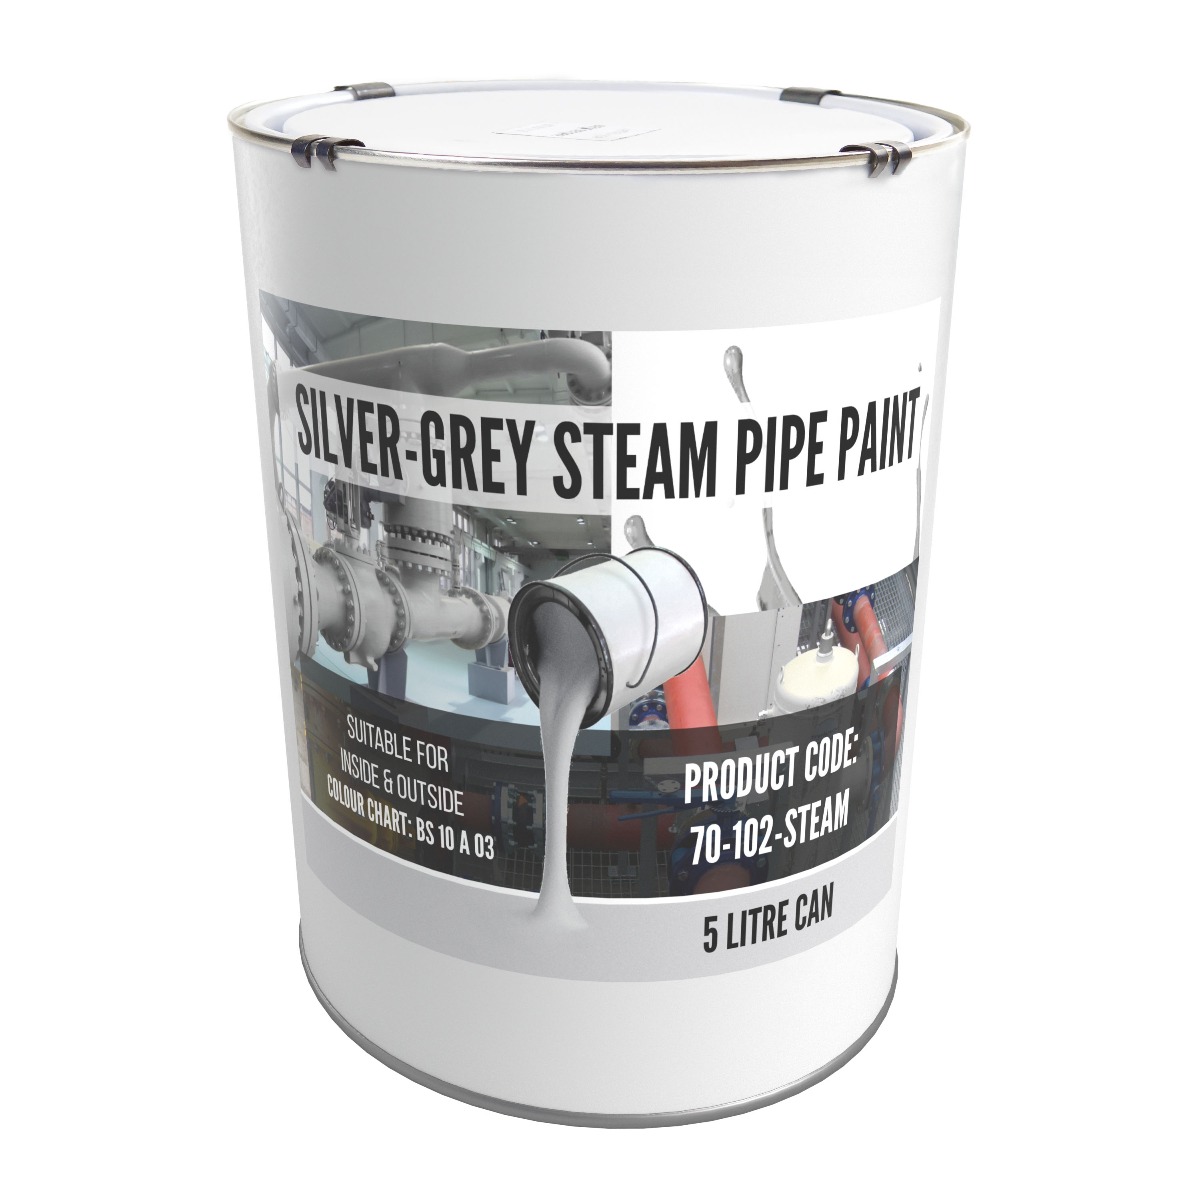 Pipe Identifcation Paint Silver-Grey (Steam Pipe) 5ltrs